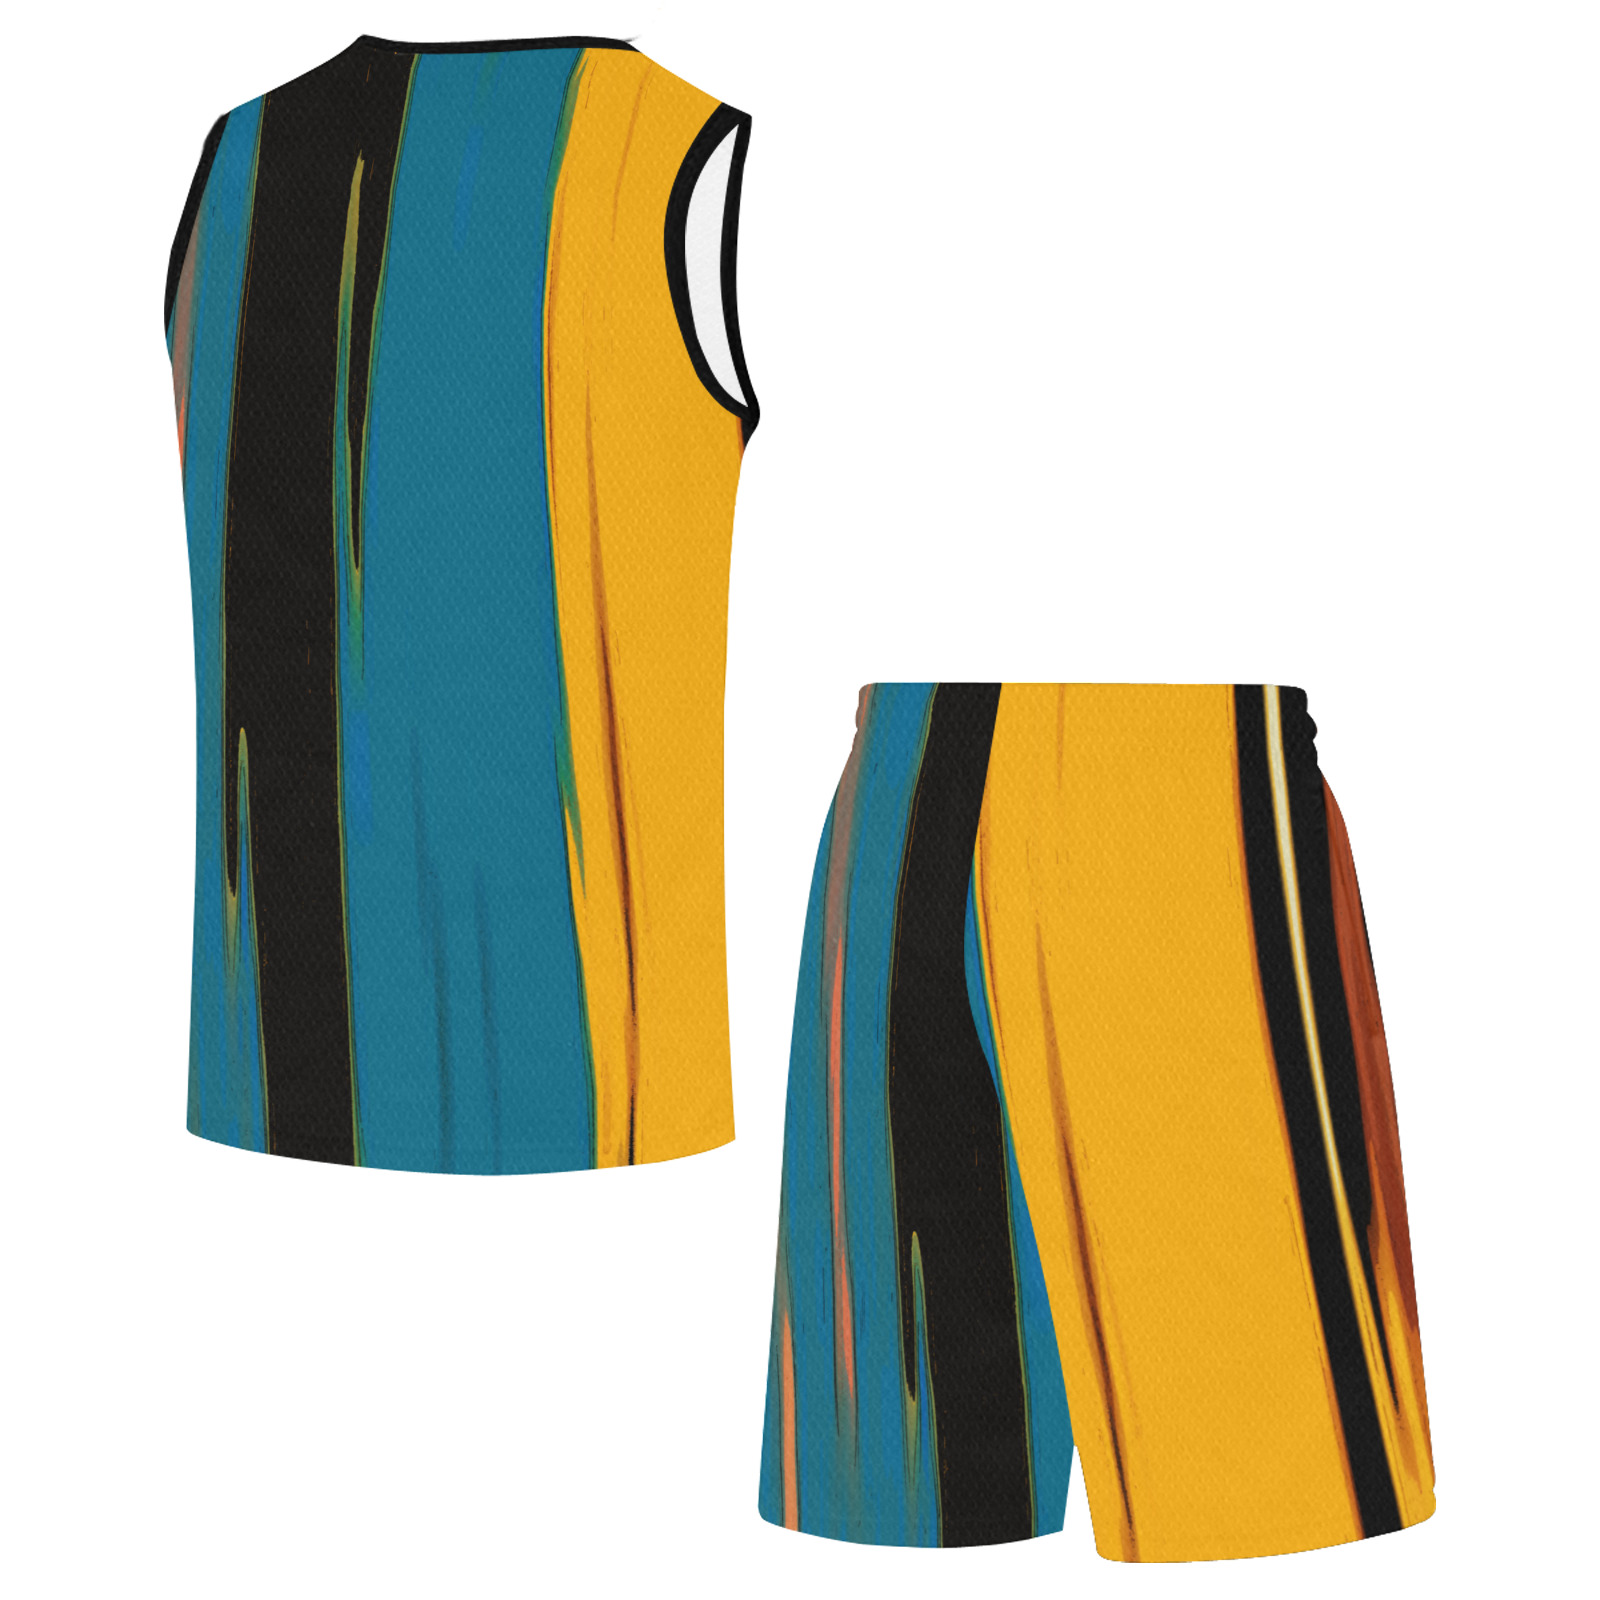 Black Turquoise And Orange Go! Abstract Art Basketball Uniform with Pocket